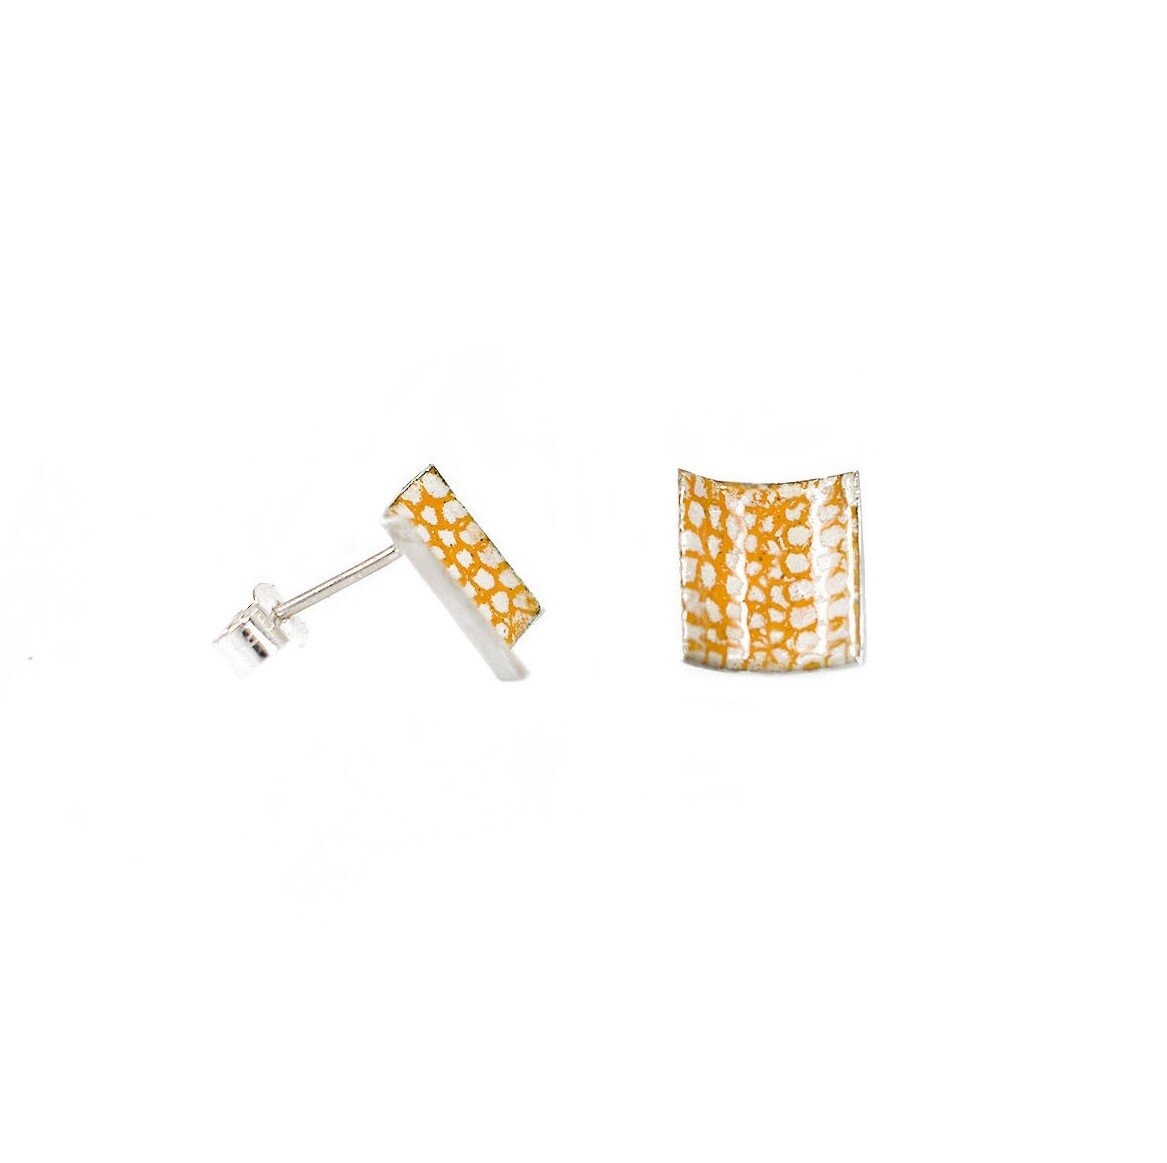 Square curved studs by Emily Higham